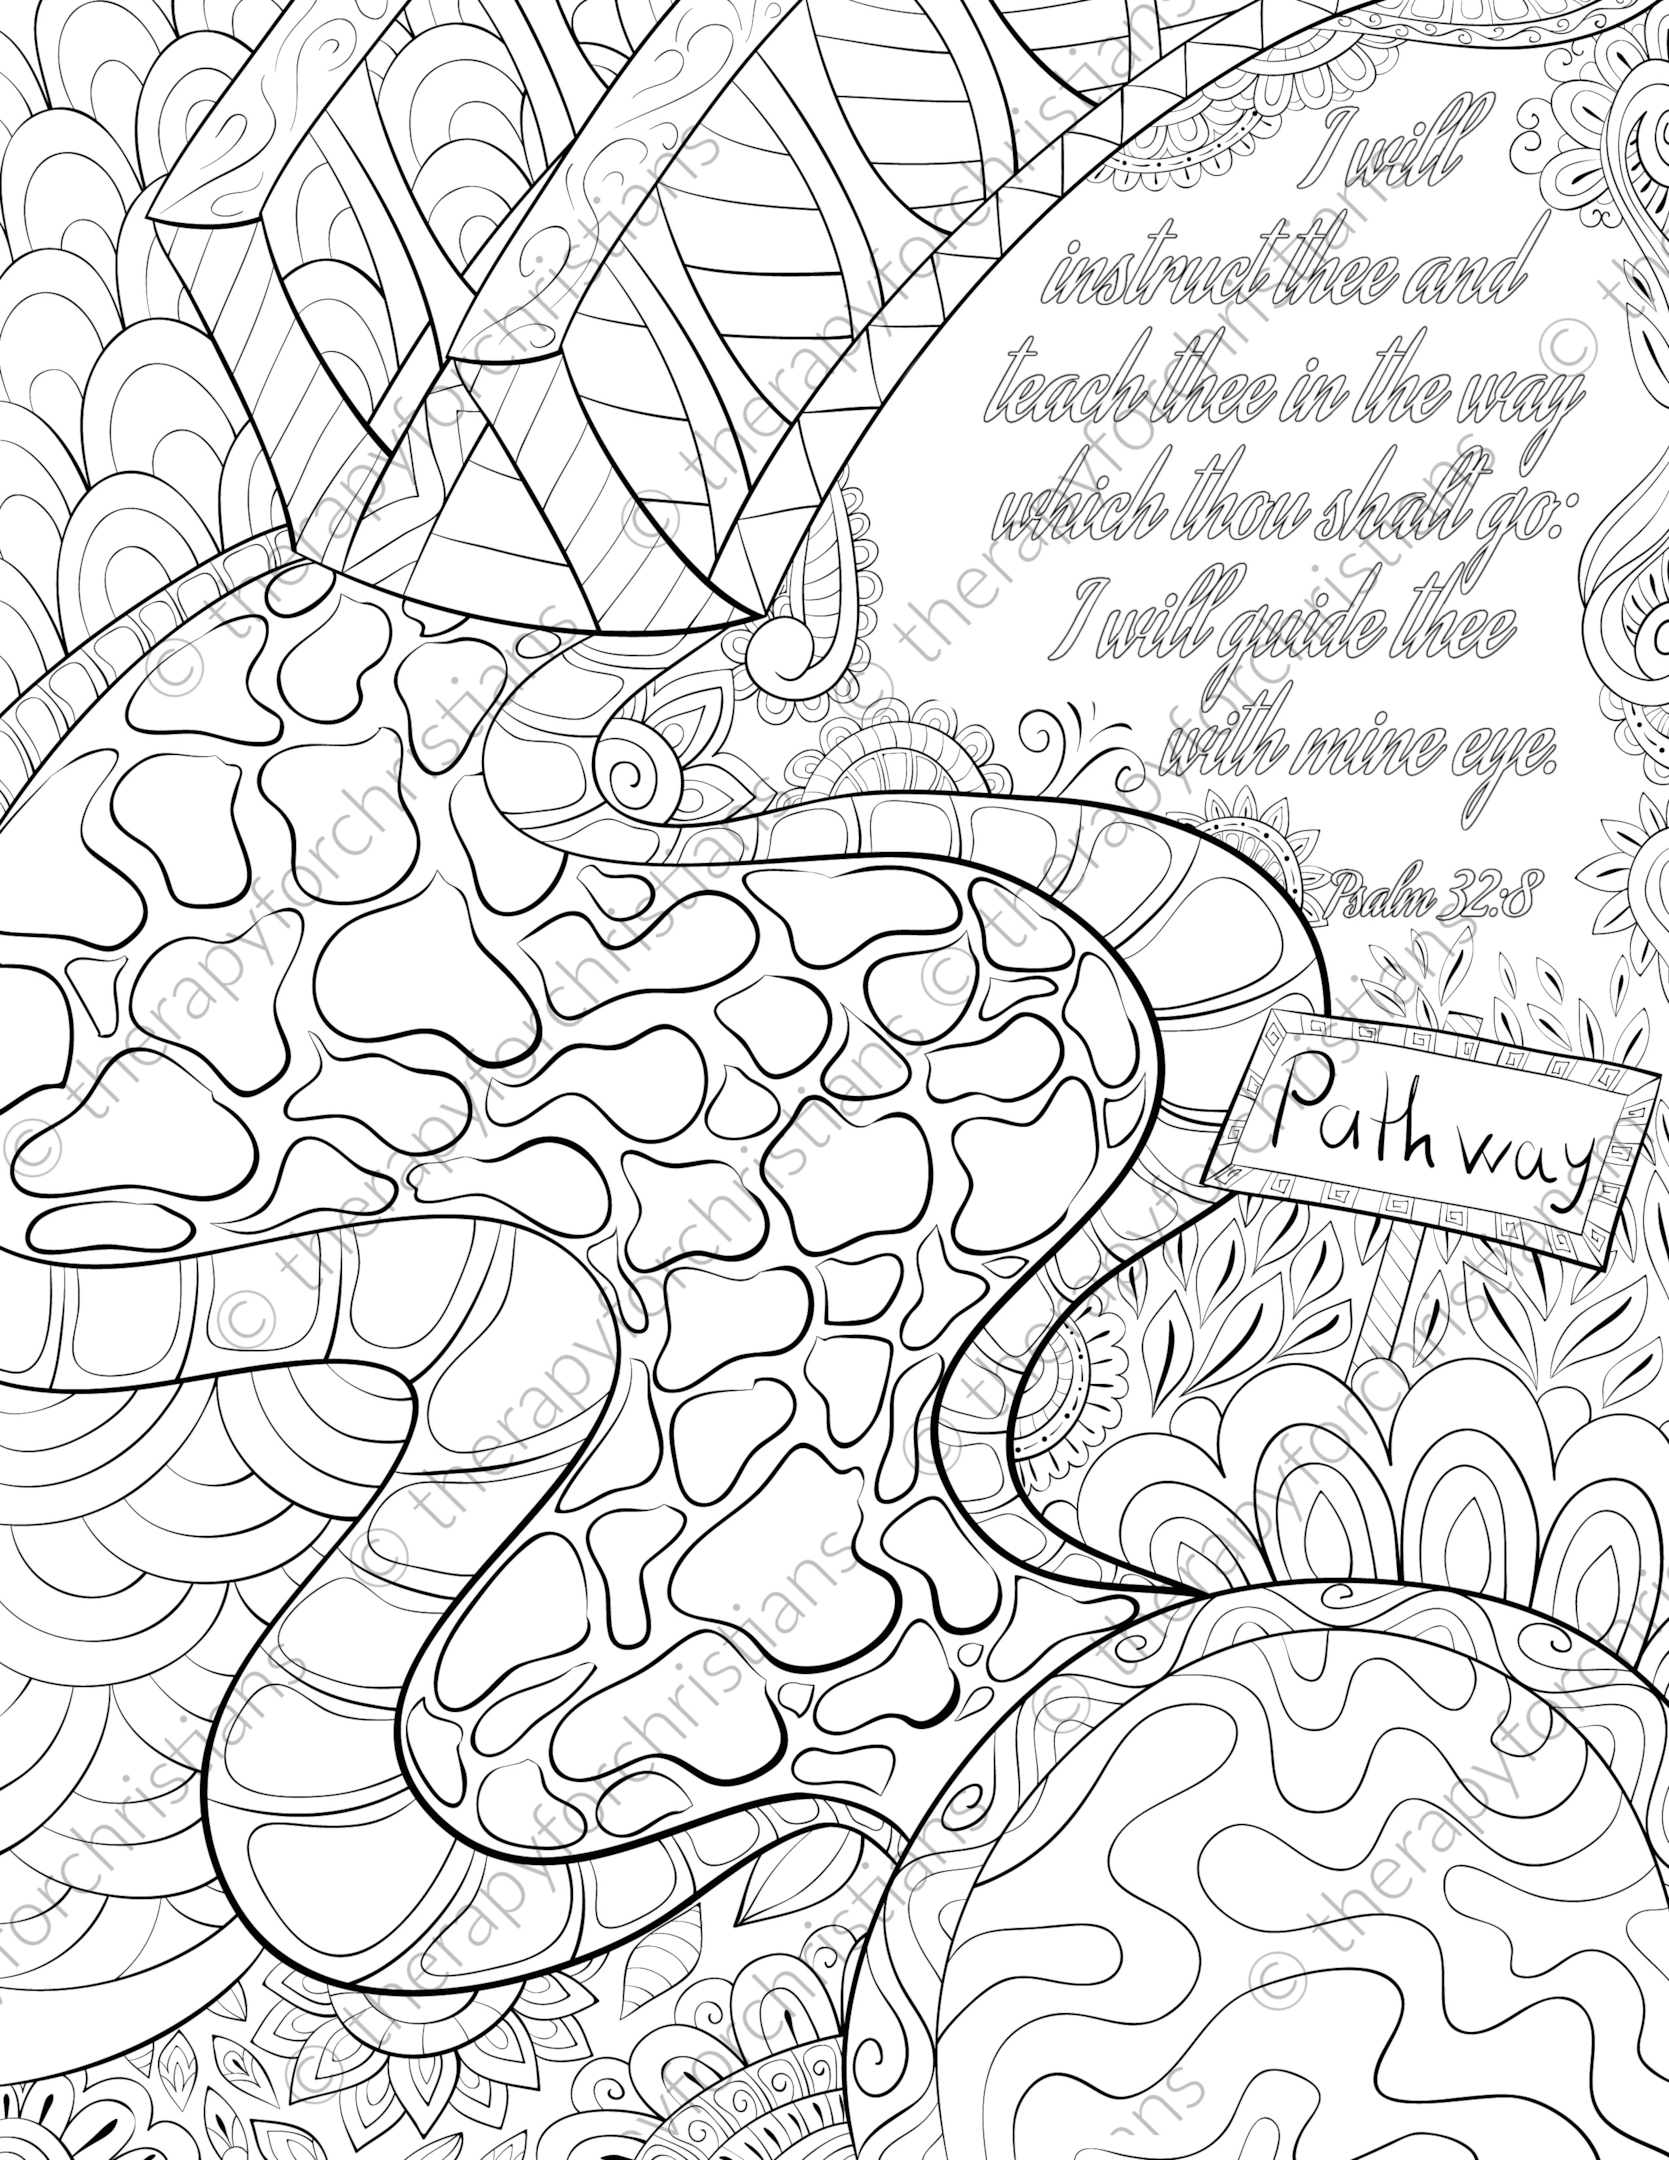 Psalm 32:8 Psalm Bible Coloring pages